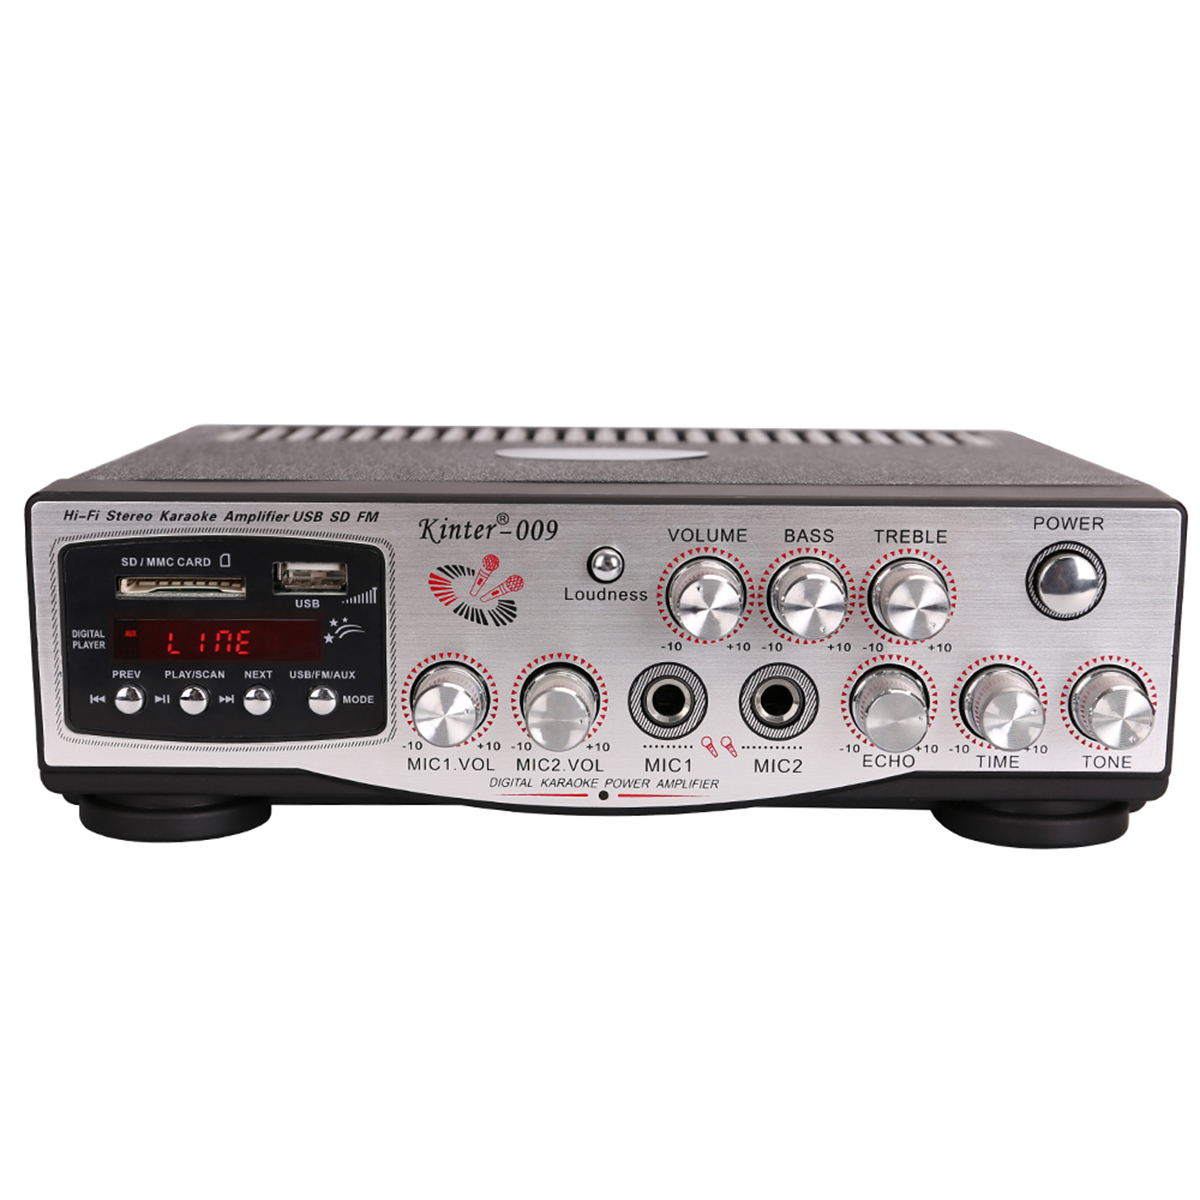 

Kinter-009 2x100W HIFI Lossless Amplifier 220V with Remote Control Support Memory Card USB FM Microphone